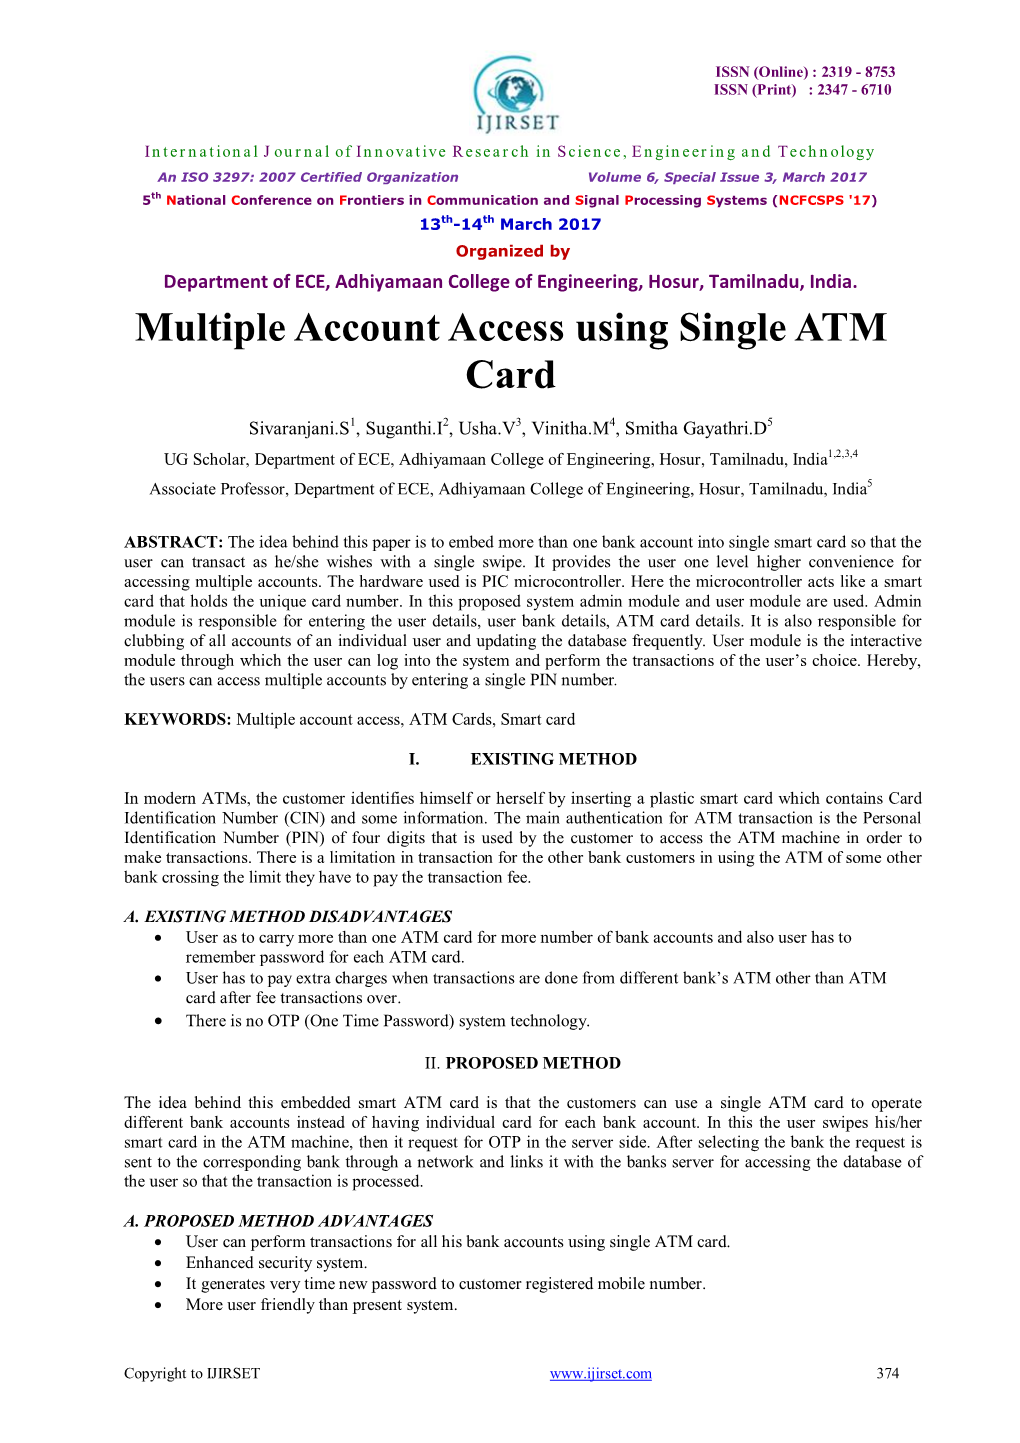 Multiple Account Access Using Single ATM Card